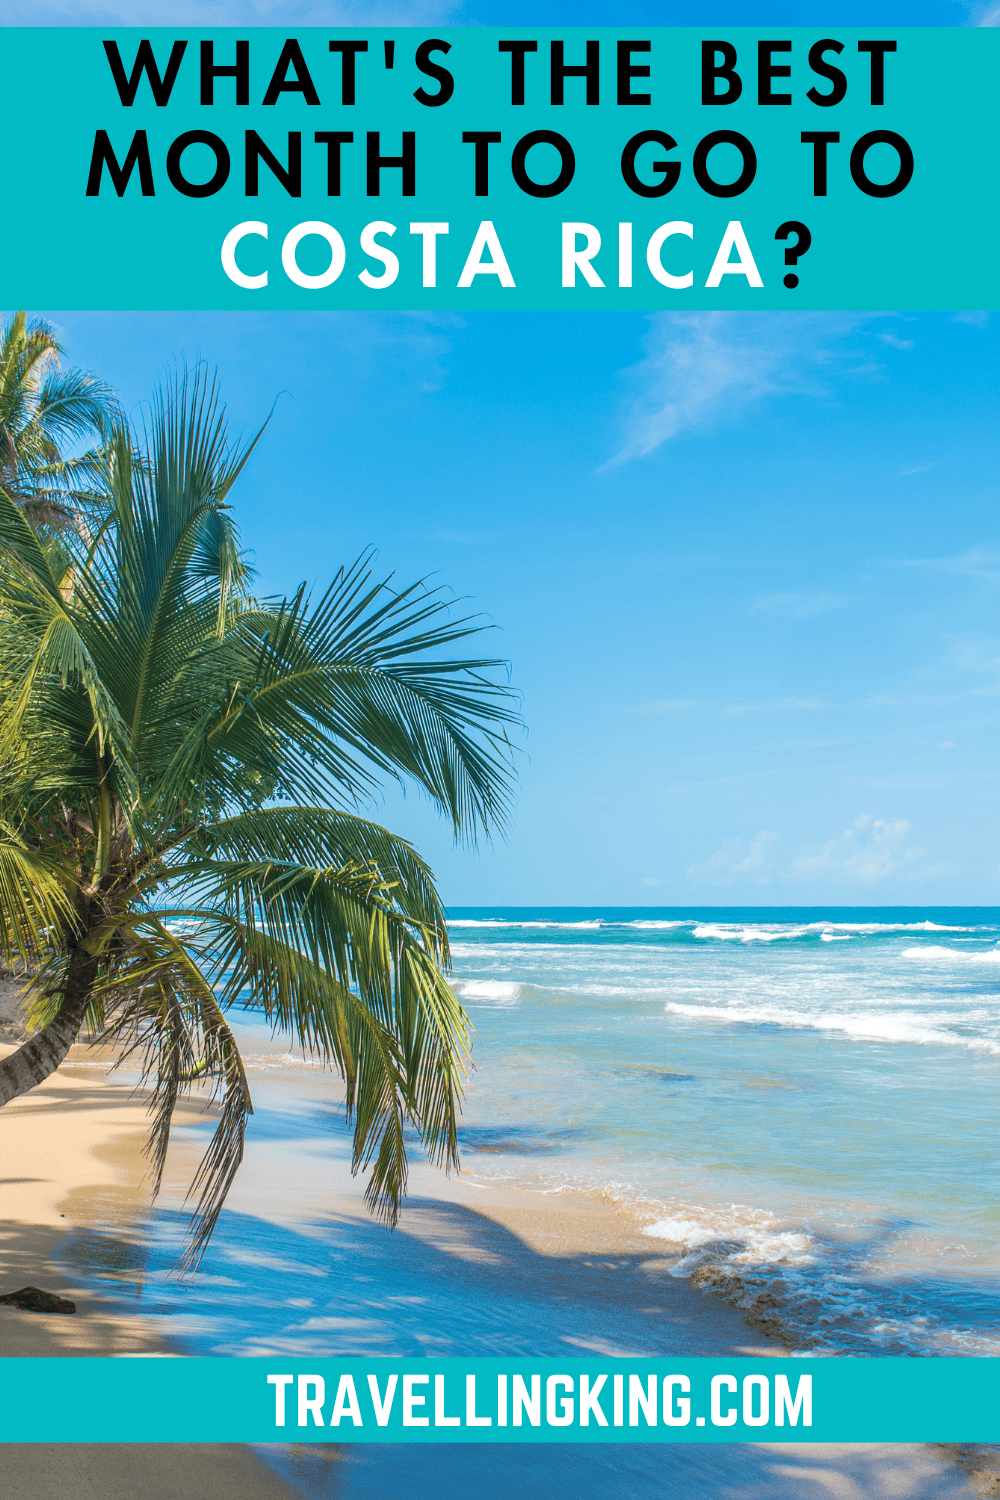 What's the Best Month to Go to Costa Rica?